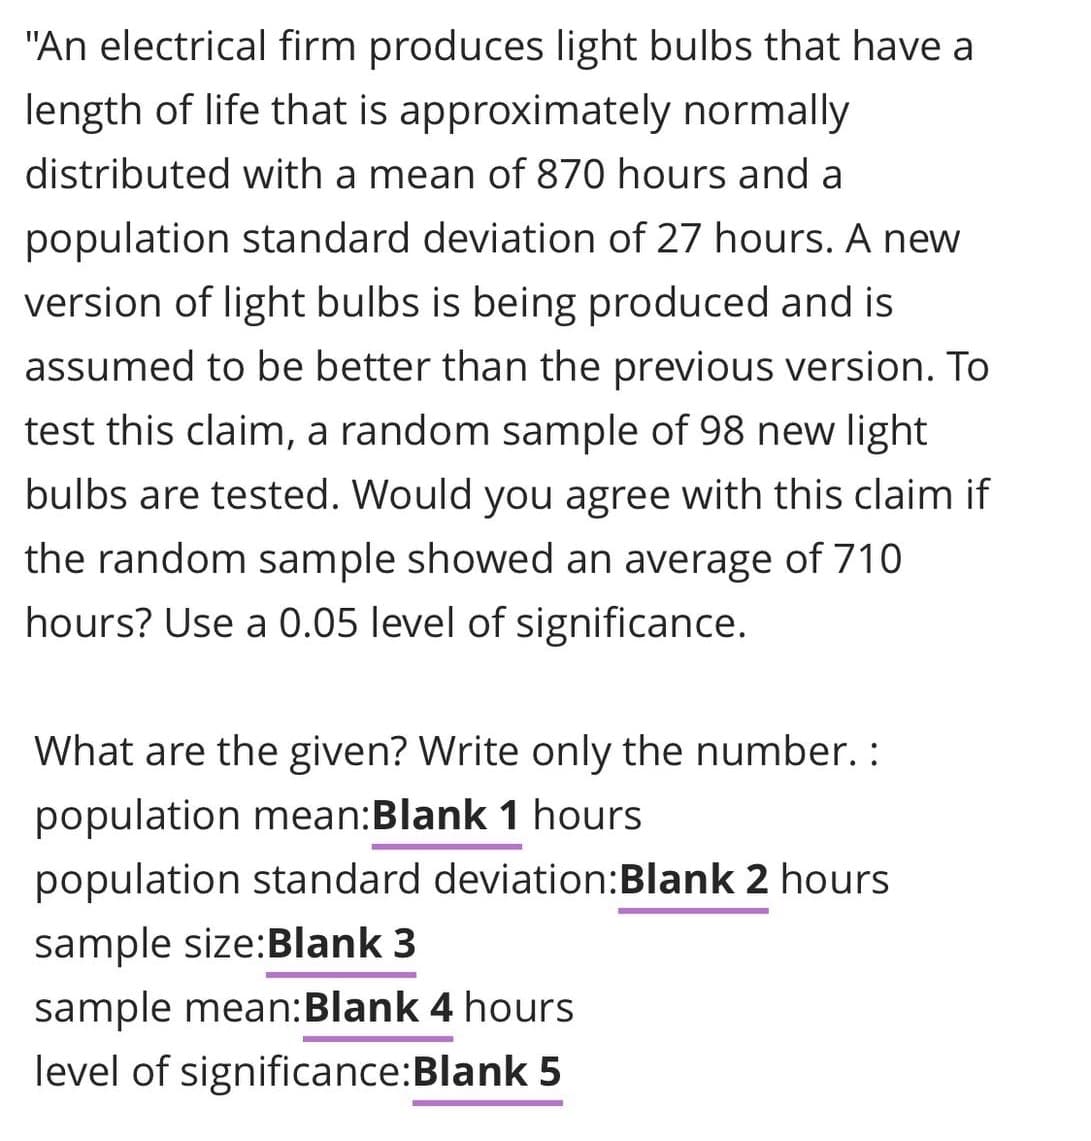 "An electrical firm produces light bulbs that have a
length of life that is approximately normally
distributed with a mean of 870 hours and a
population standard deviation of 27 hours. A new
version of light bulbs is being produced and is
assumed to be better than the previous version. To
test this claim, a random sample of 98 new light
bulbs are tested. Would you agree with this claim if
the random sample showed an average of 710
hours? Use a 0.05 level of significance.
What are the given? Write only the number. :
population mean:Blank 1 hours
population standard deviation:Blank 2 hours
sample size:Blank 3
sample mean:Blank 4 hours
level of significance:Blank 5
